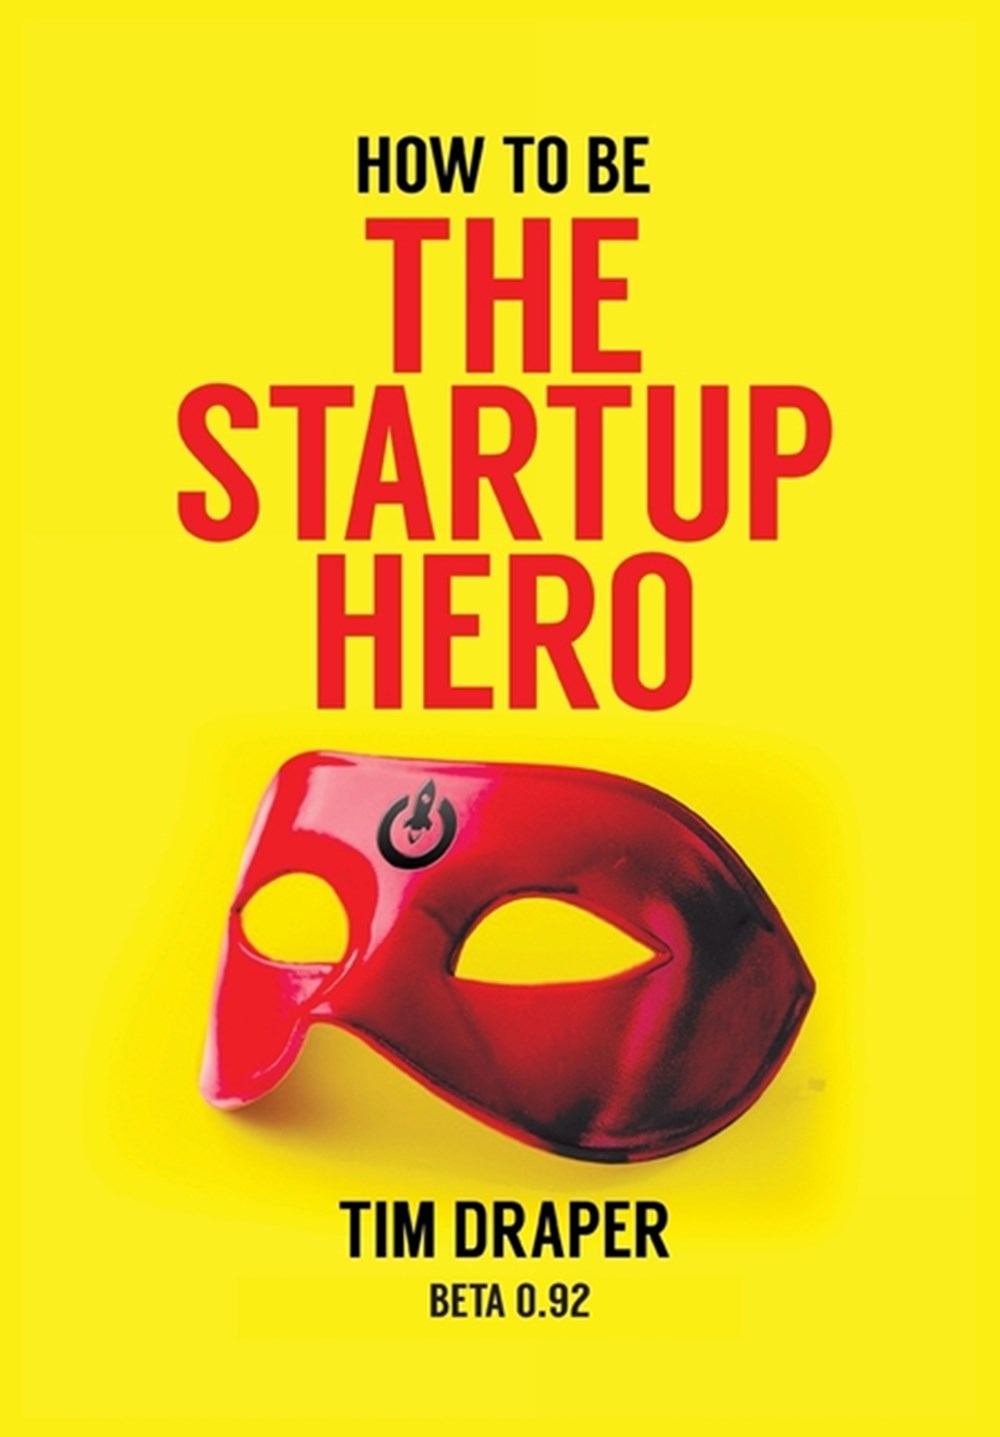 How to be The Startup Hero Beta 0.92